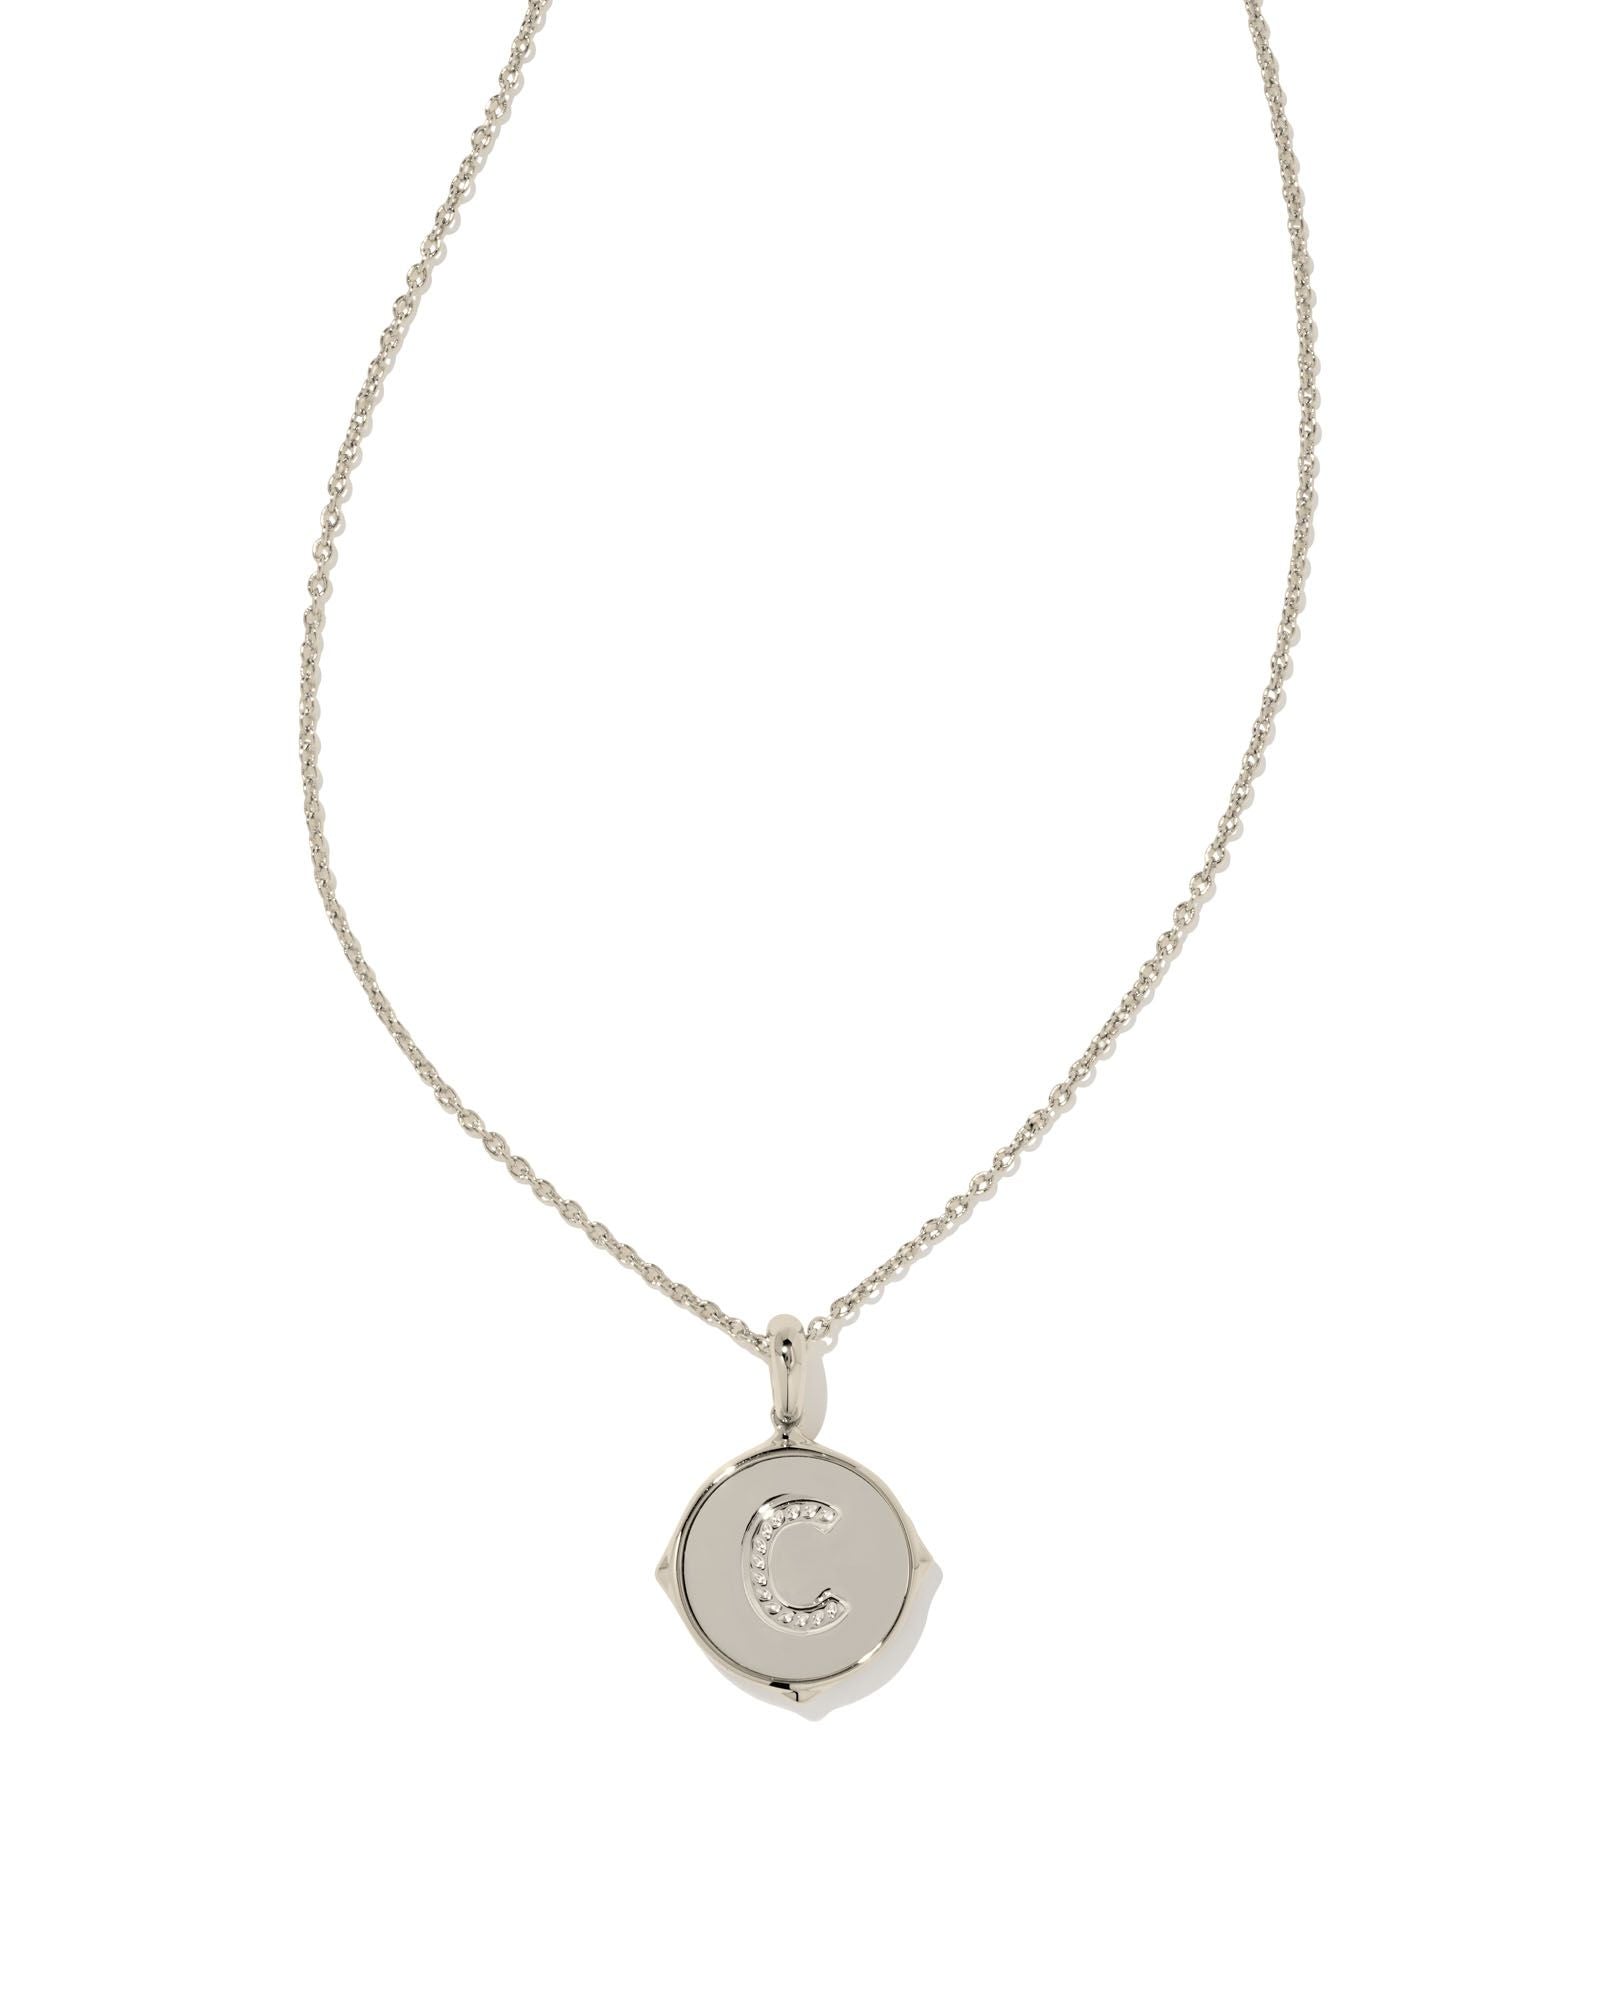 Kendra Scott Letter C Disc Pendant Necklace Rhodium Black Mother of Pearl-Necklaces-Kendra Scott-N1800RHD-C-The Twisted Chandelier